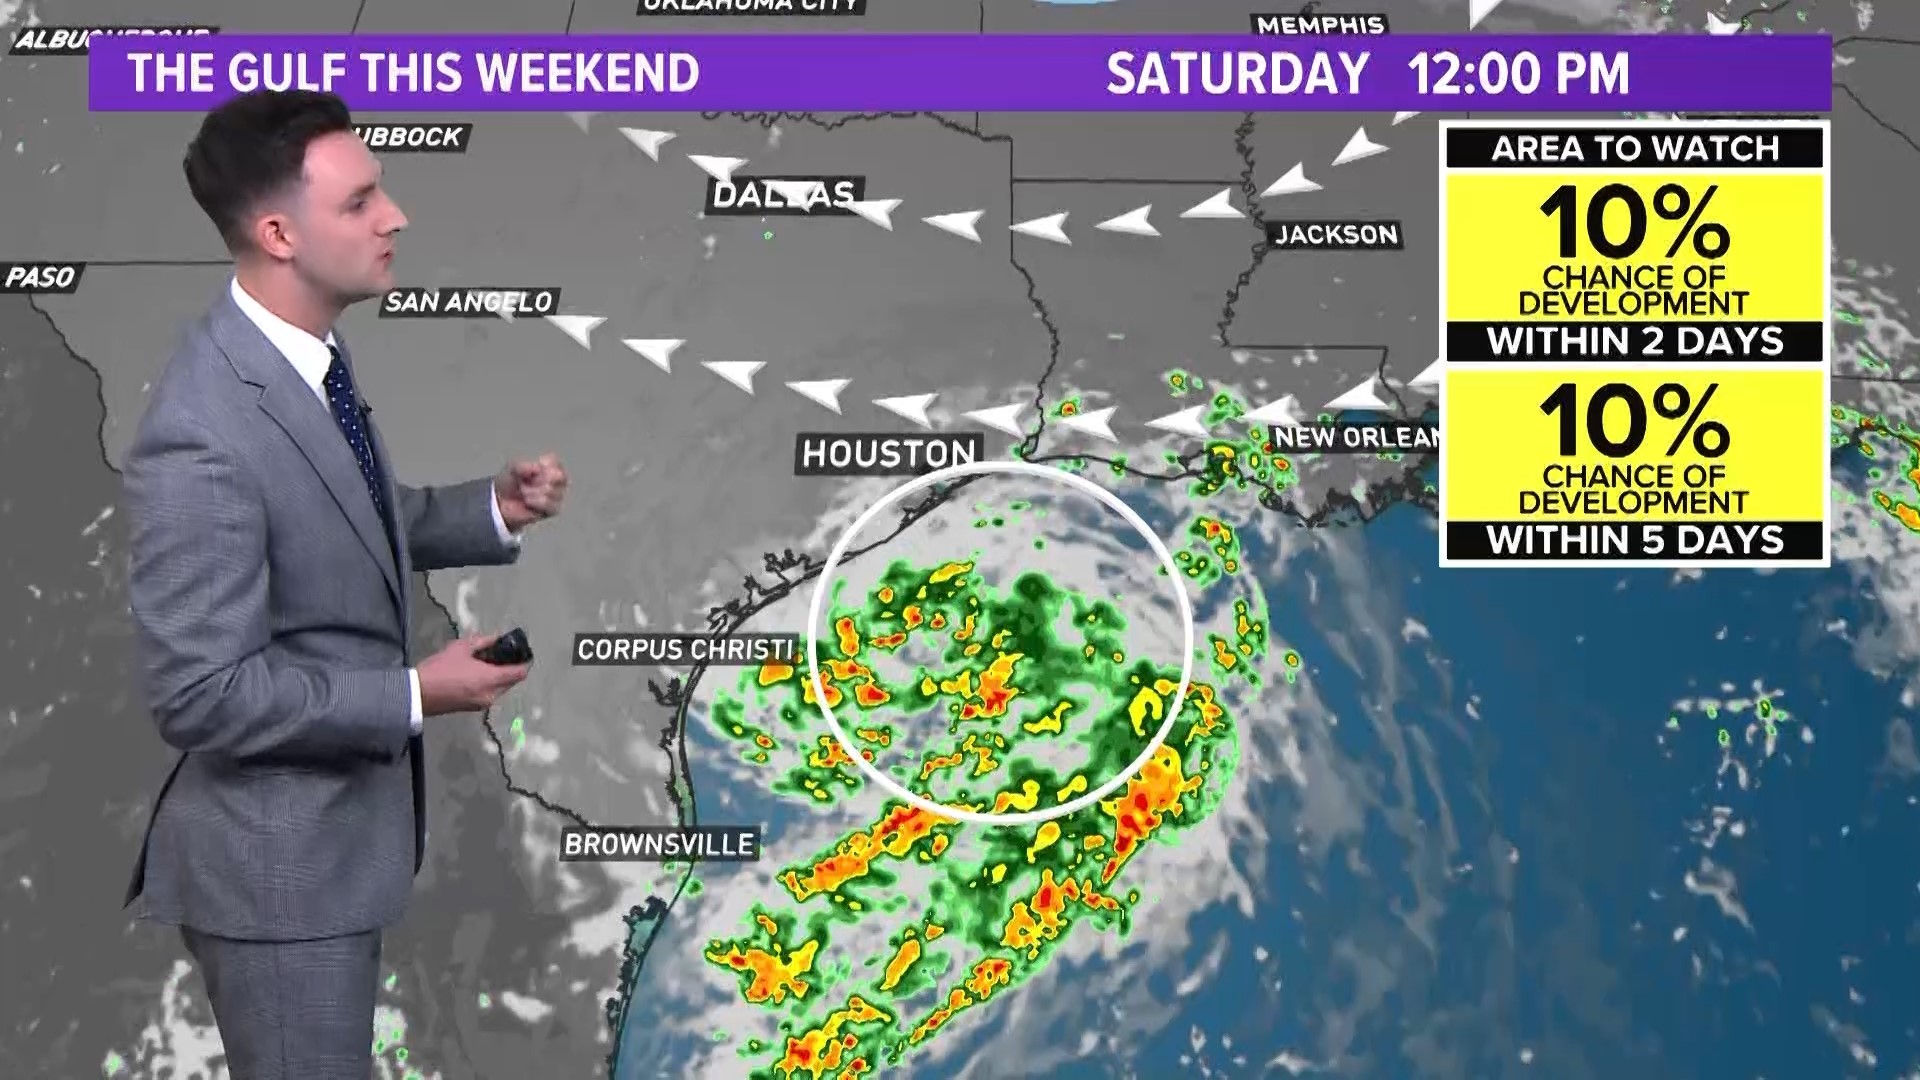 Invest 98-L will bring much needed rain to parts of Texas this weekend.